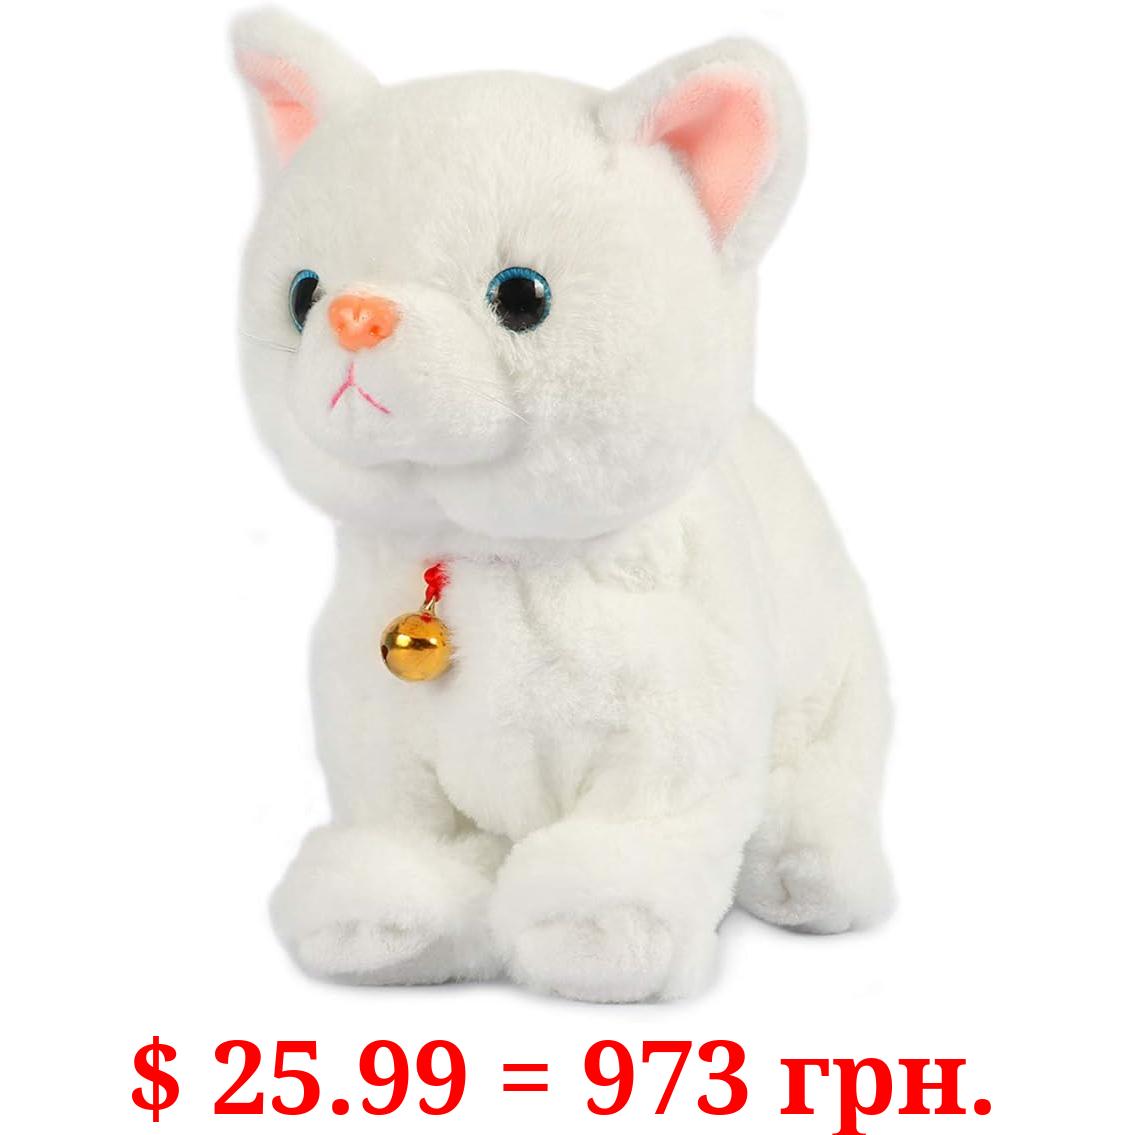 Smalody Interactive Plush Toys, Novelty Sound Control Electronic Cat Electronic Pets Robot Cat Gift for Children (White)